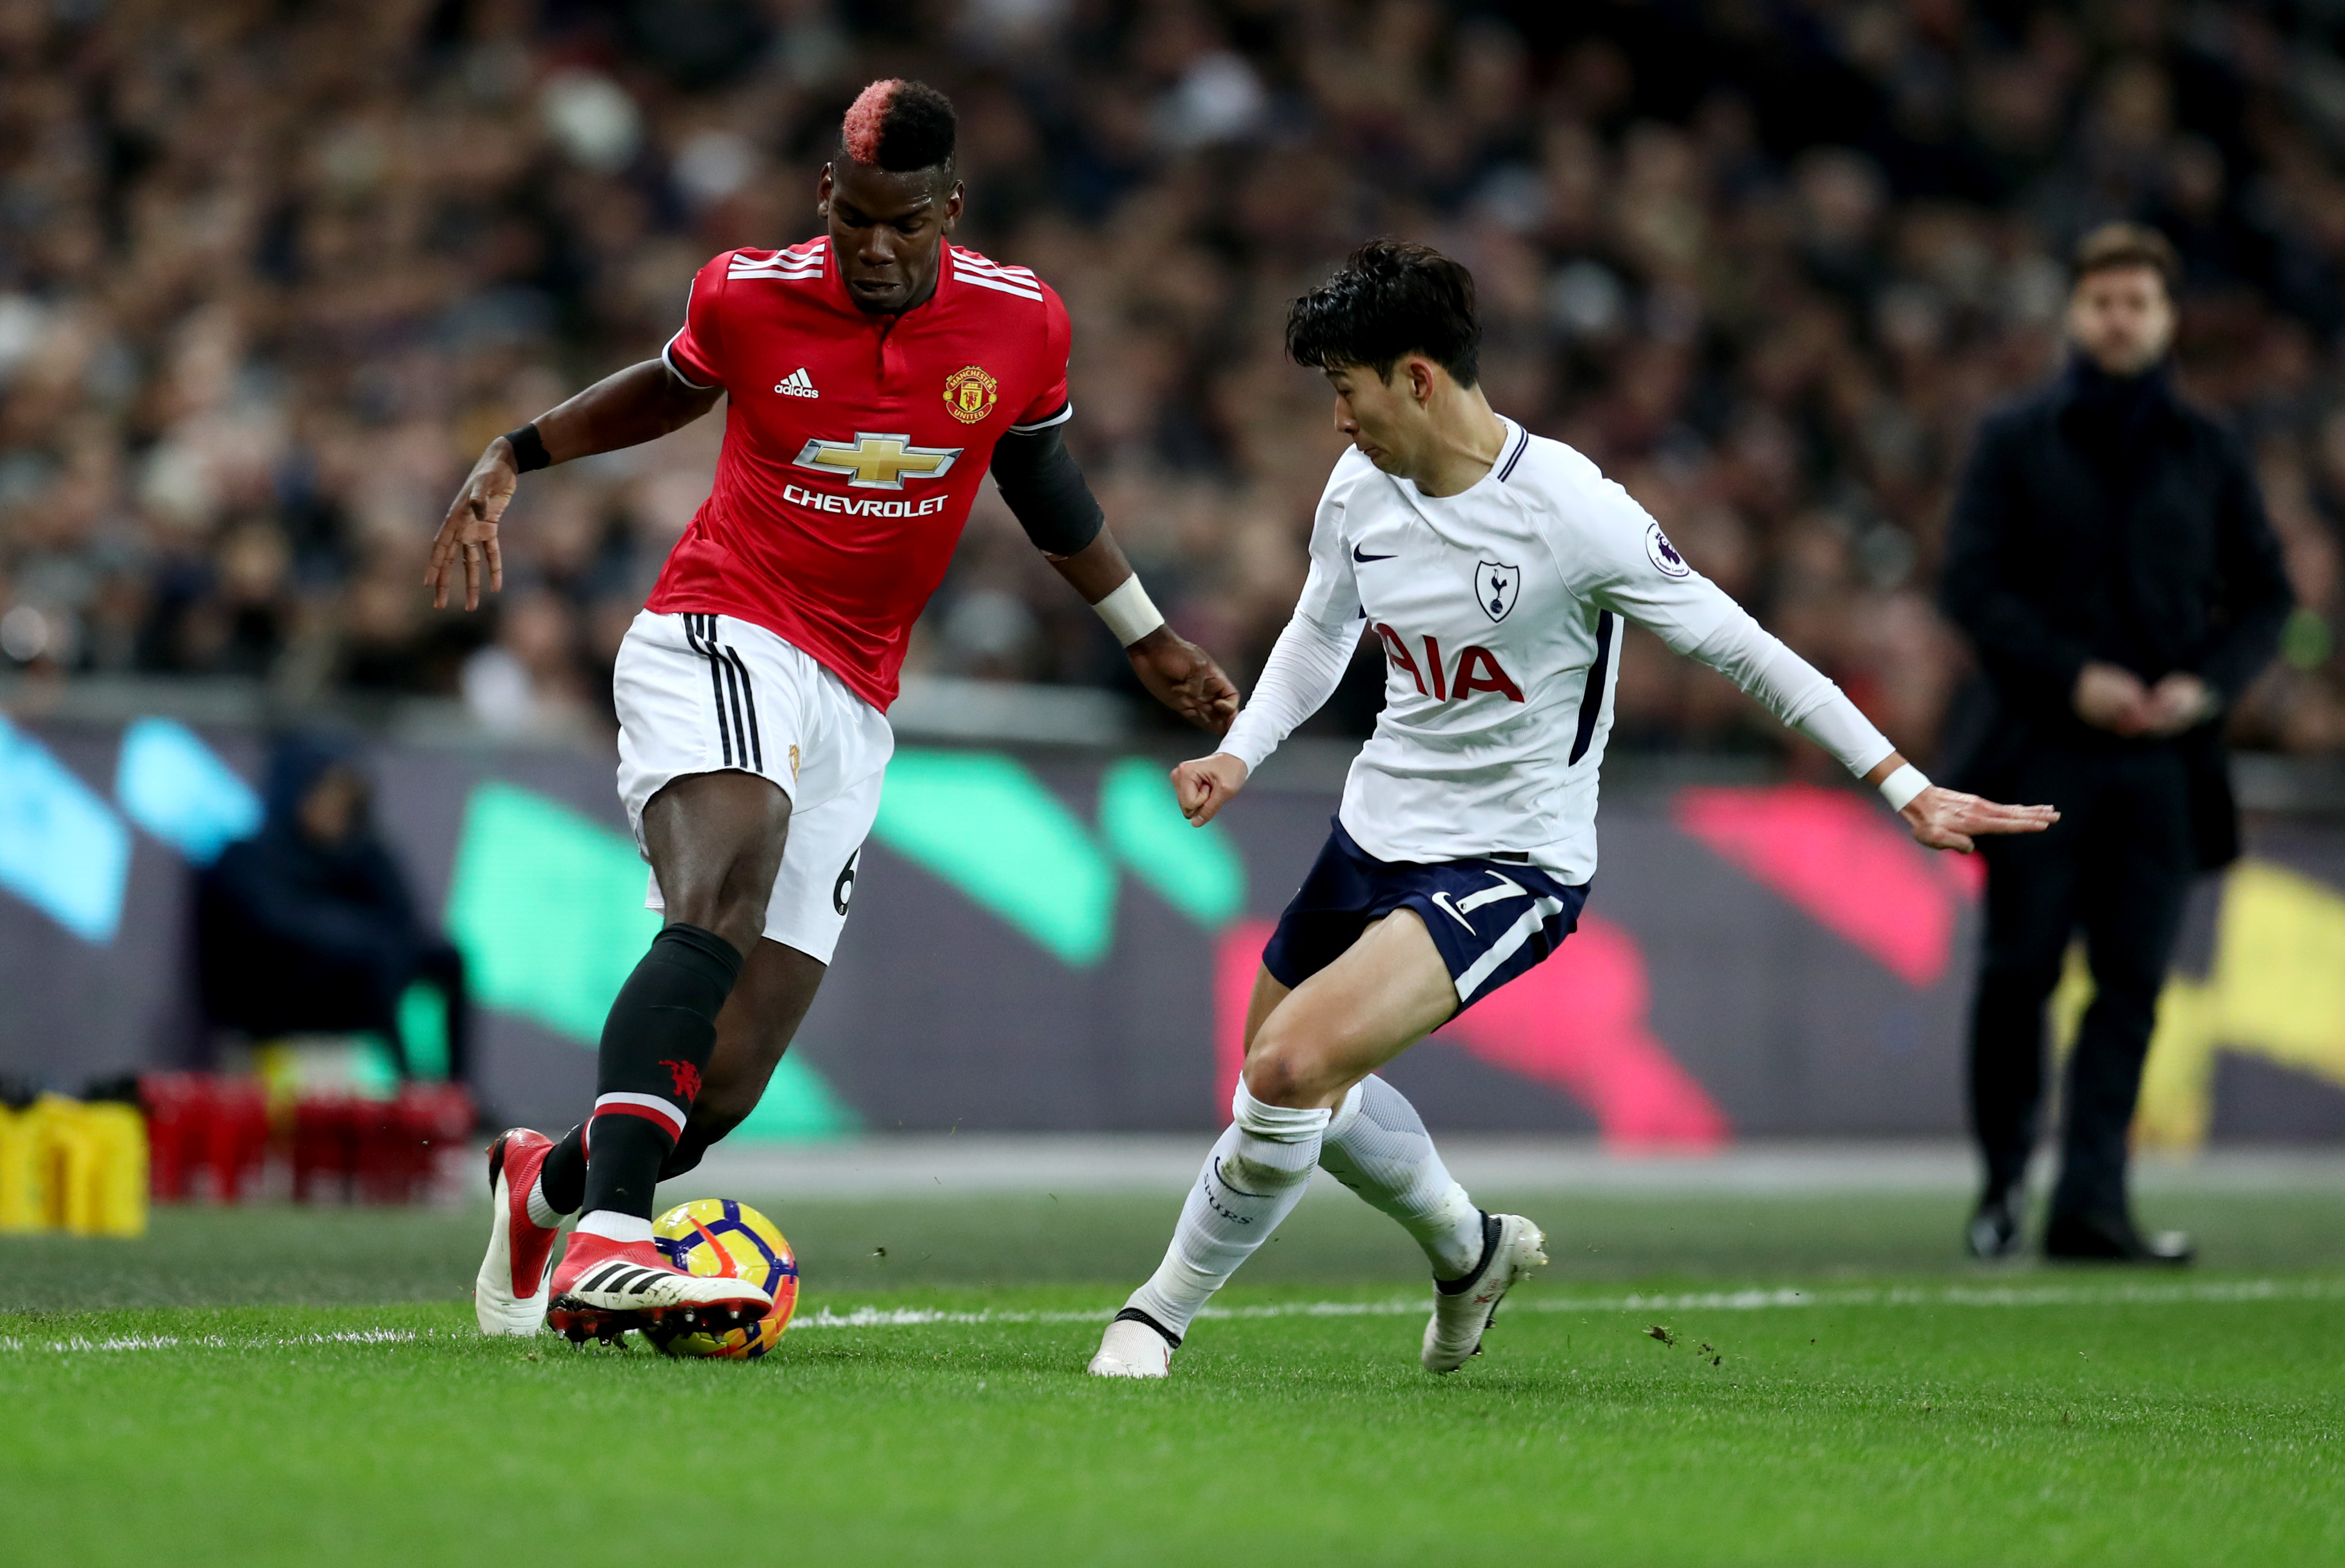 LONDON, ENGLAND - JANUARY 31: Paul Pogba of Manchester United and Son Heung-min of Tottenham Hotspur during the Premier League match between Tottenham Hotspur and Manchester United at Wembley Stadium on January 31, 2018 in London, England. (Photo by Catherine Ivill/Getty Images)